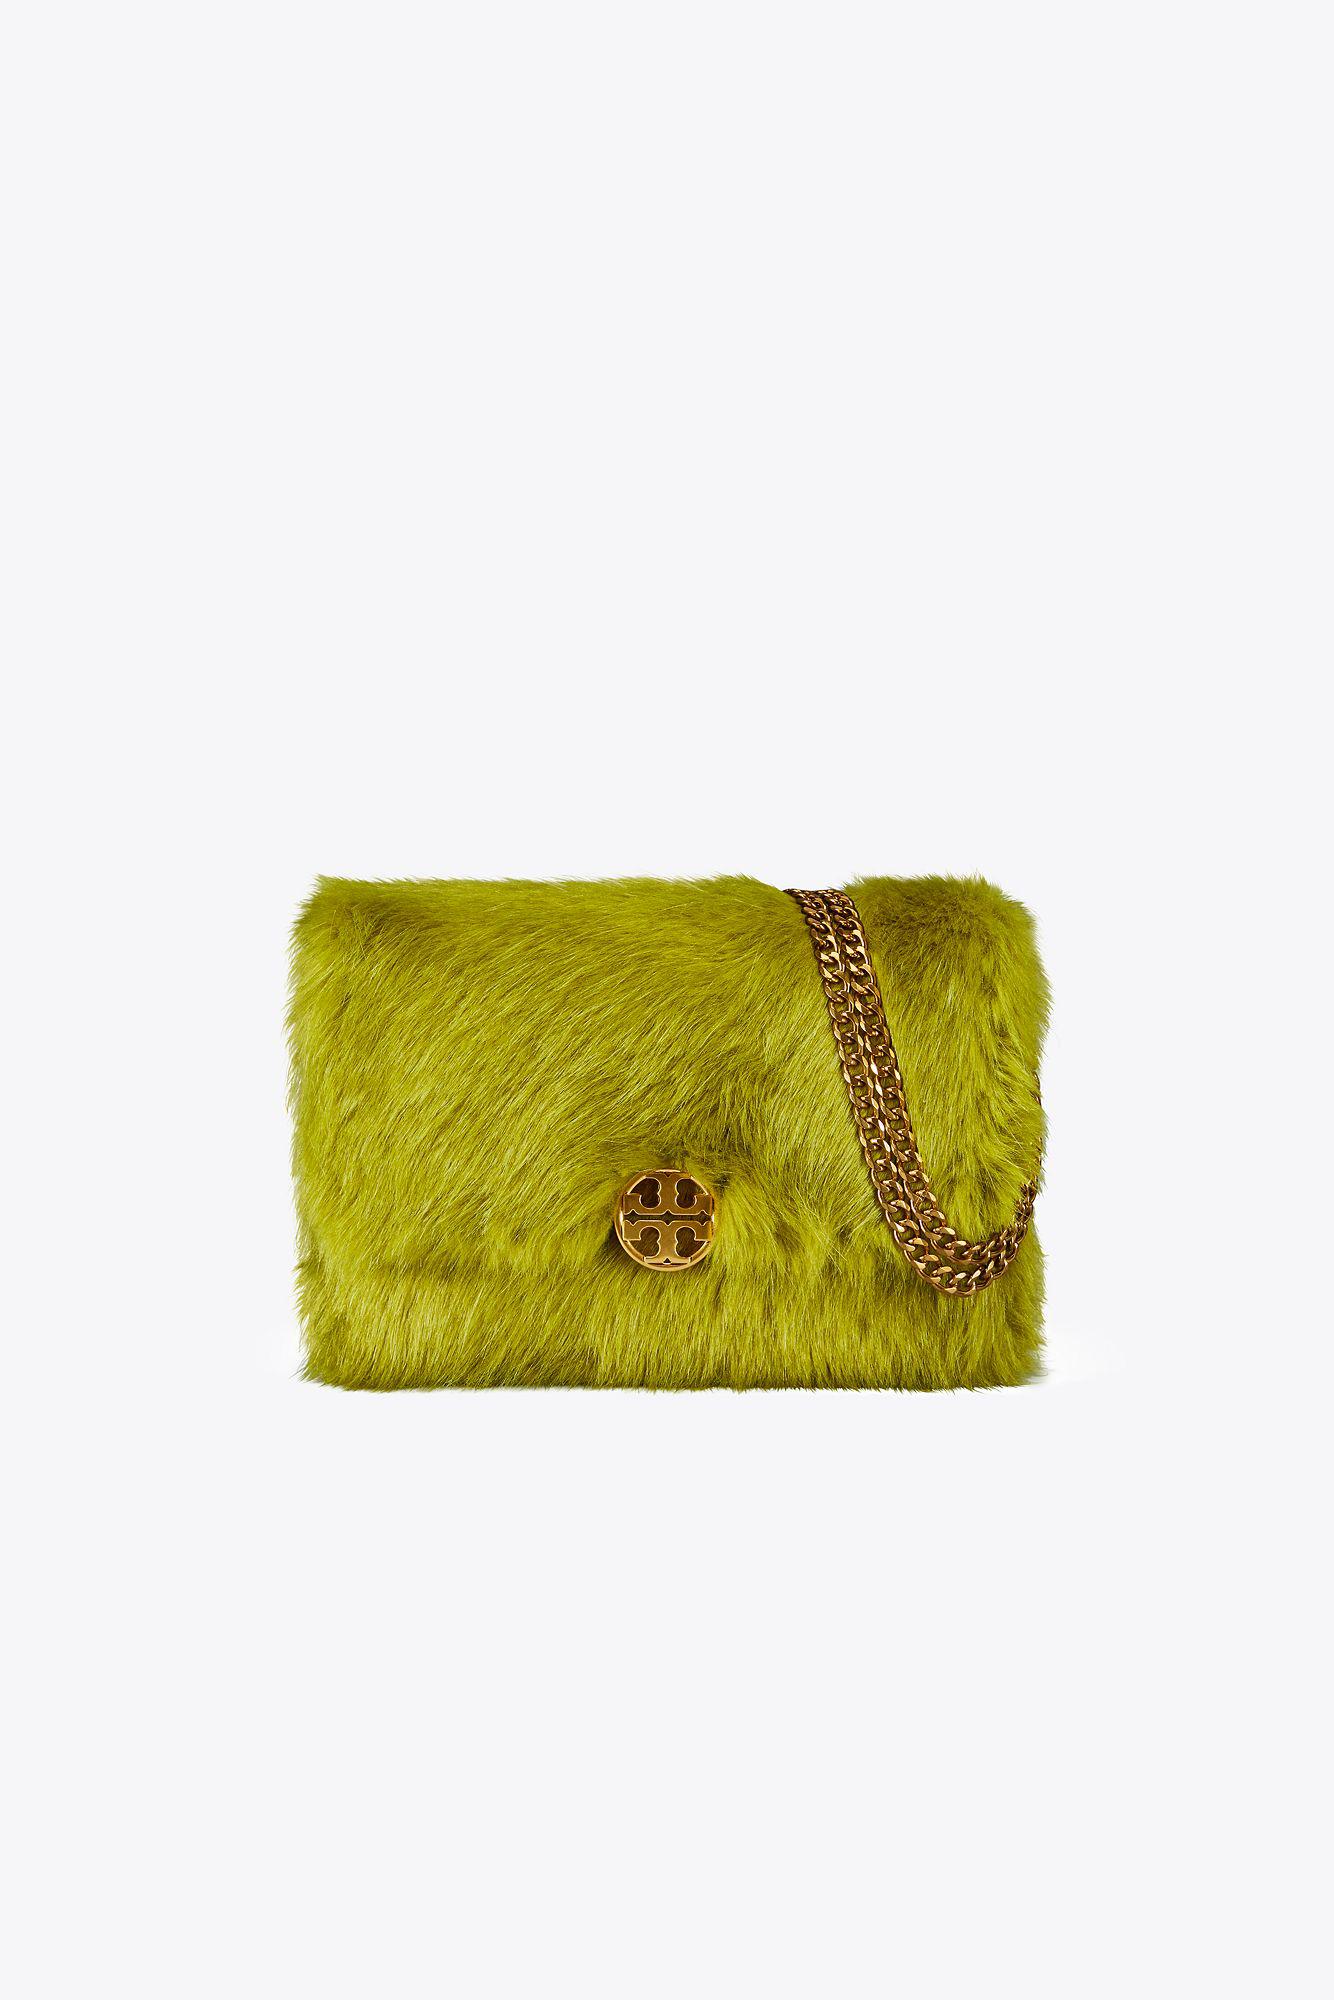 Tory Burch - Our Chelsea convertible shoulder bag